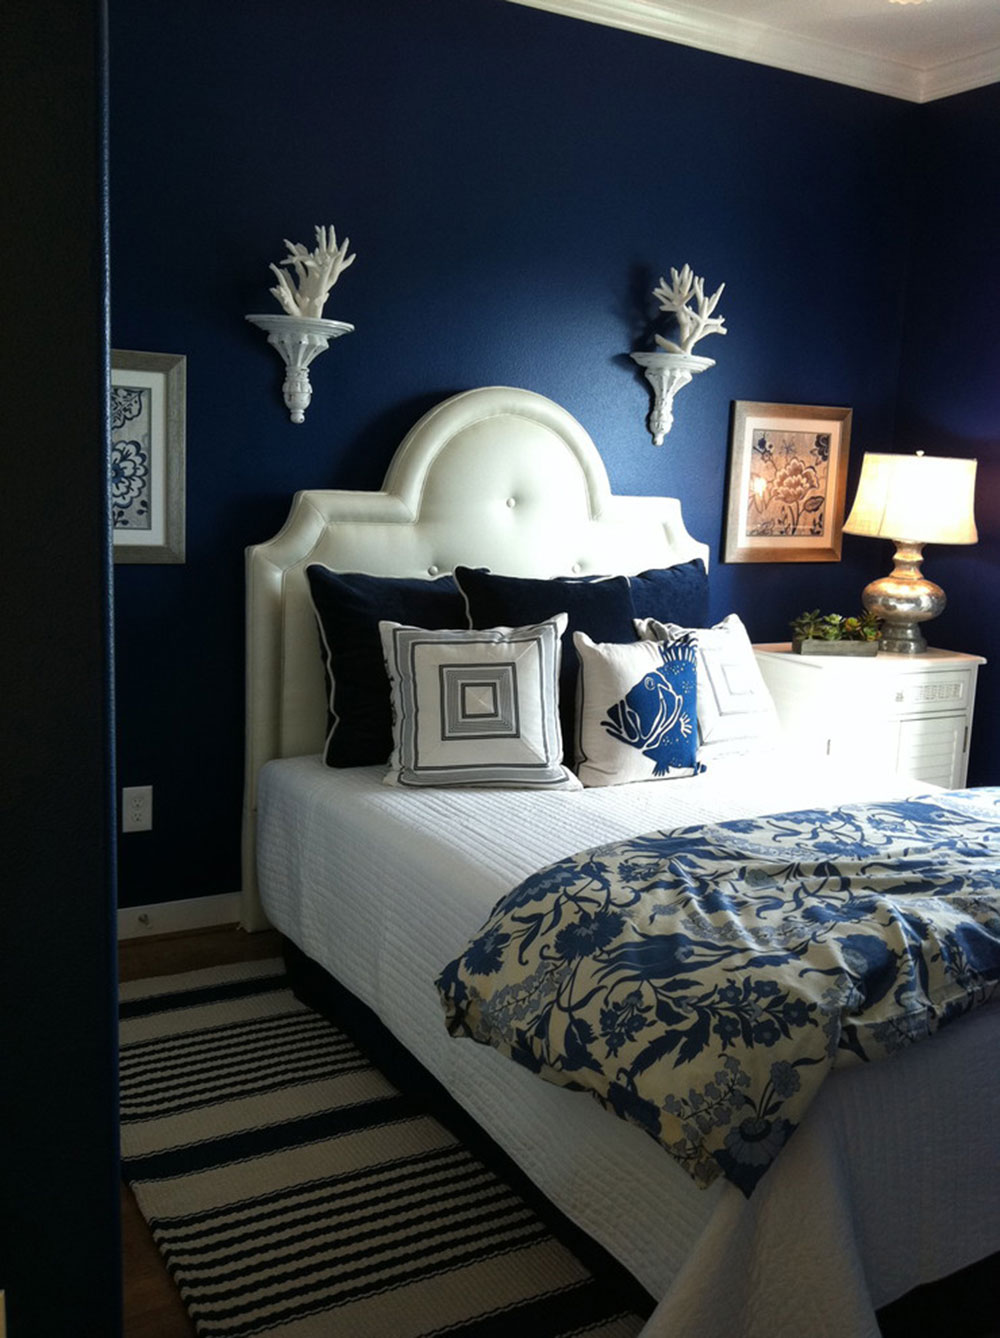 Spaces-One-Size-Doesnt-Fit-All-by-Kim-Armstrong Coastal bedroom ideas you have to check out